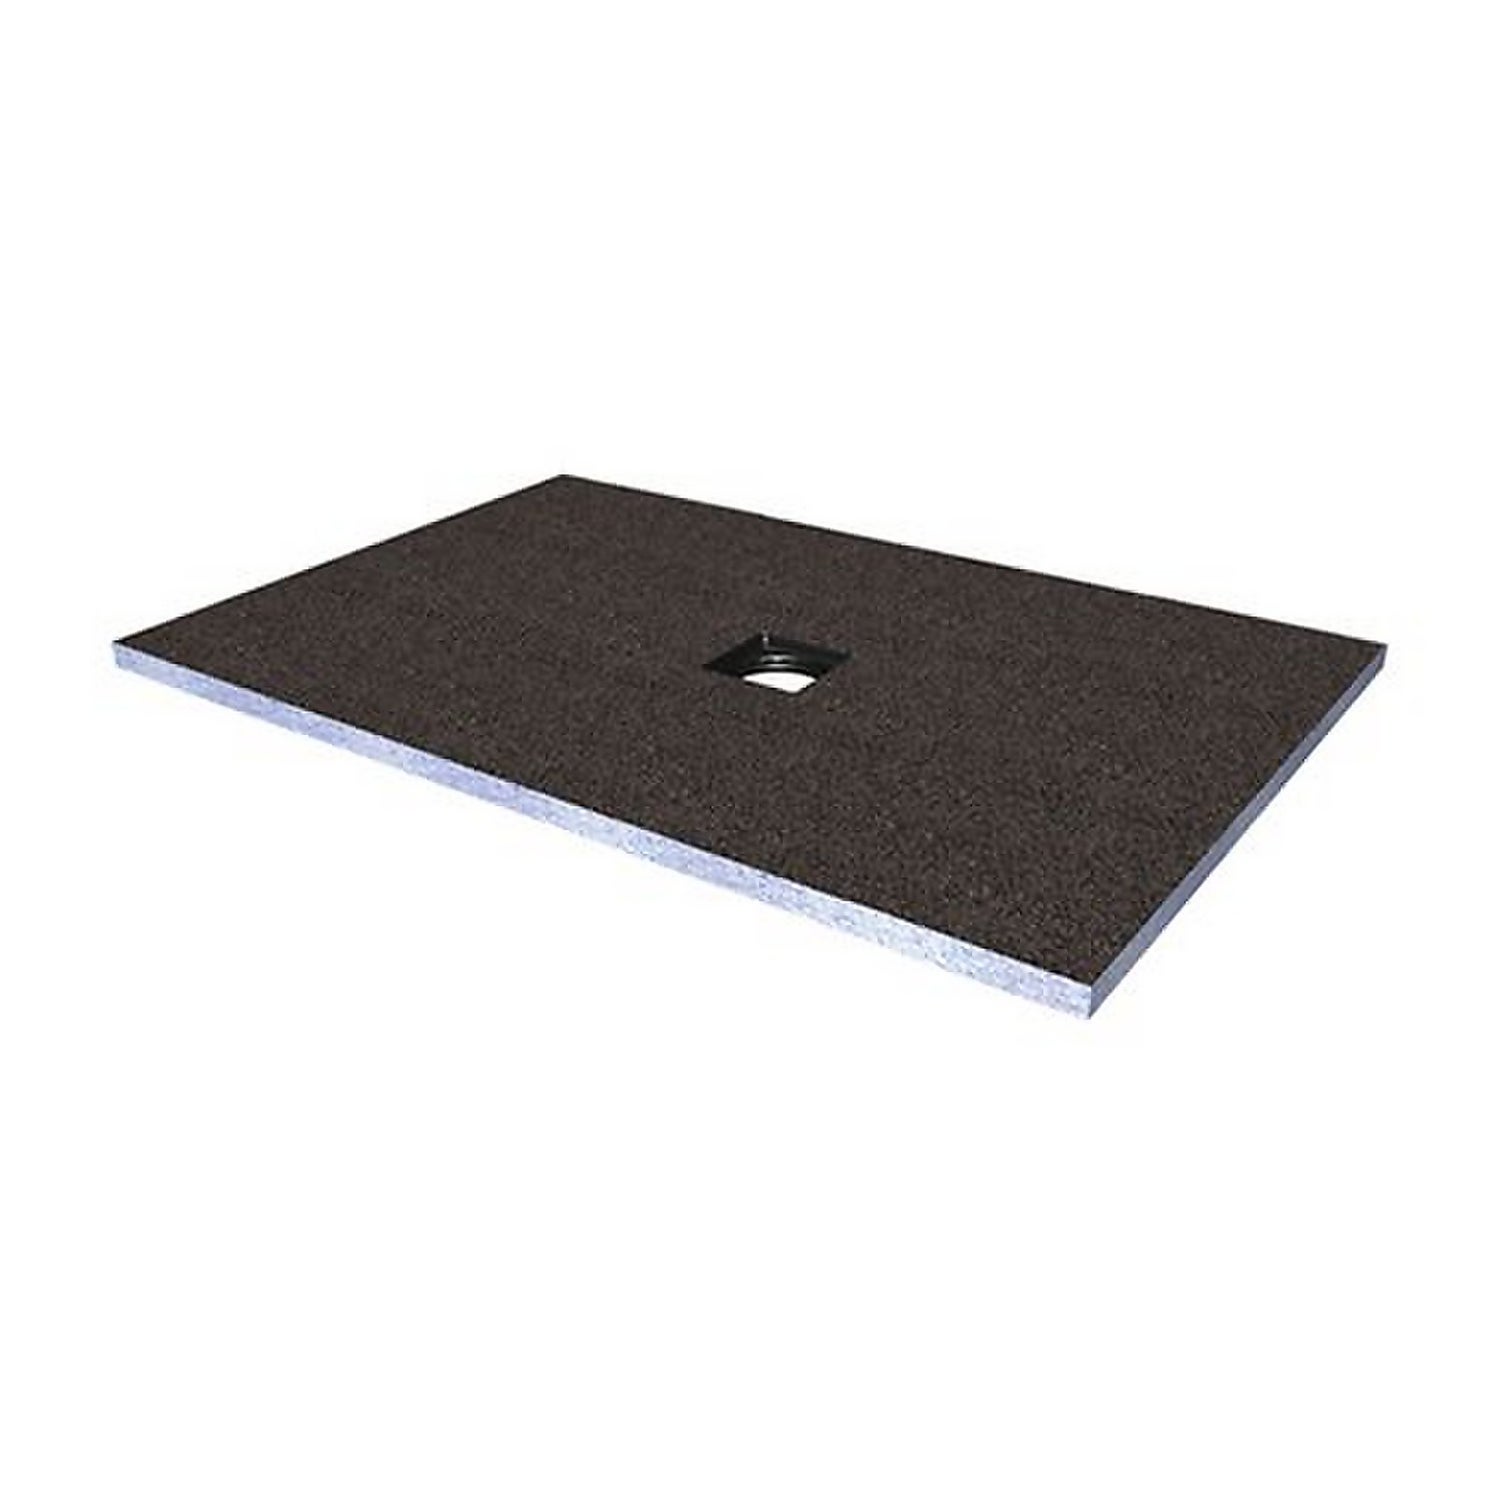 Square Centre Drain Wet room Tray 1800 x 900mm